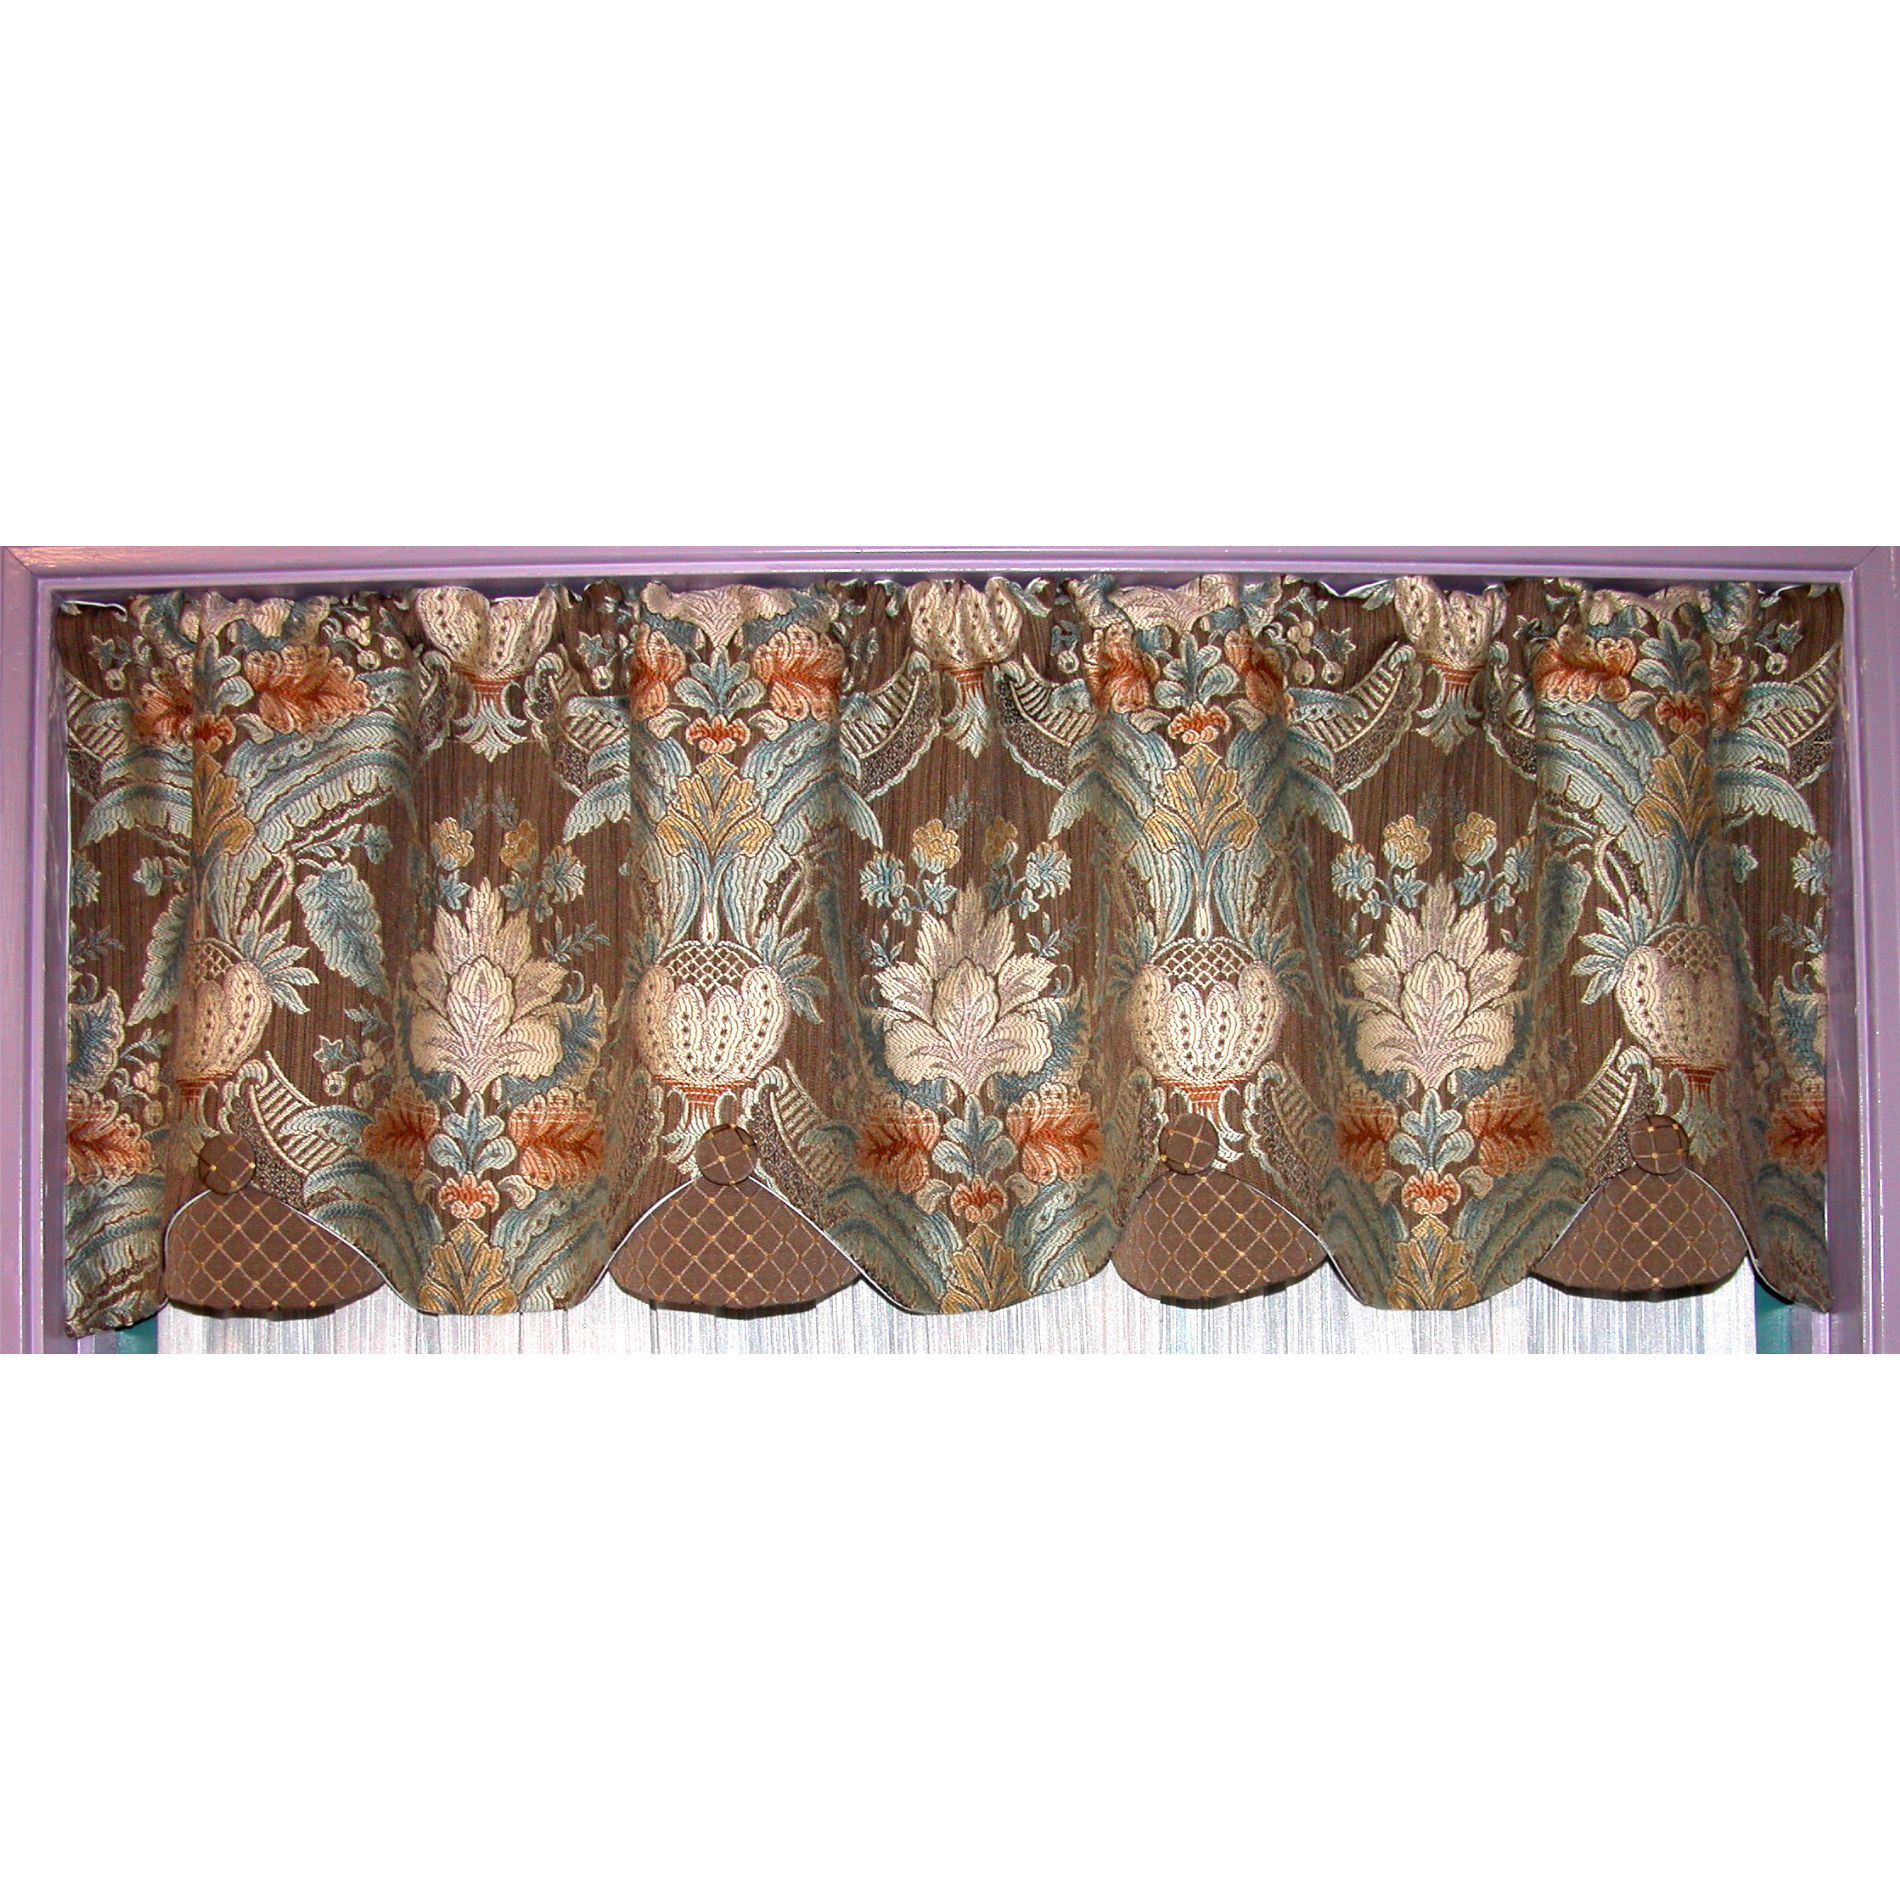 Classic Jacquard Covered Buttons Valance